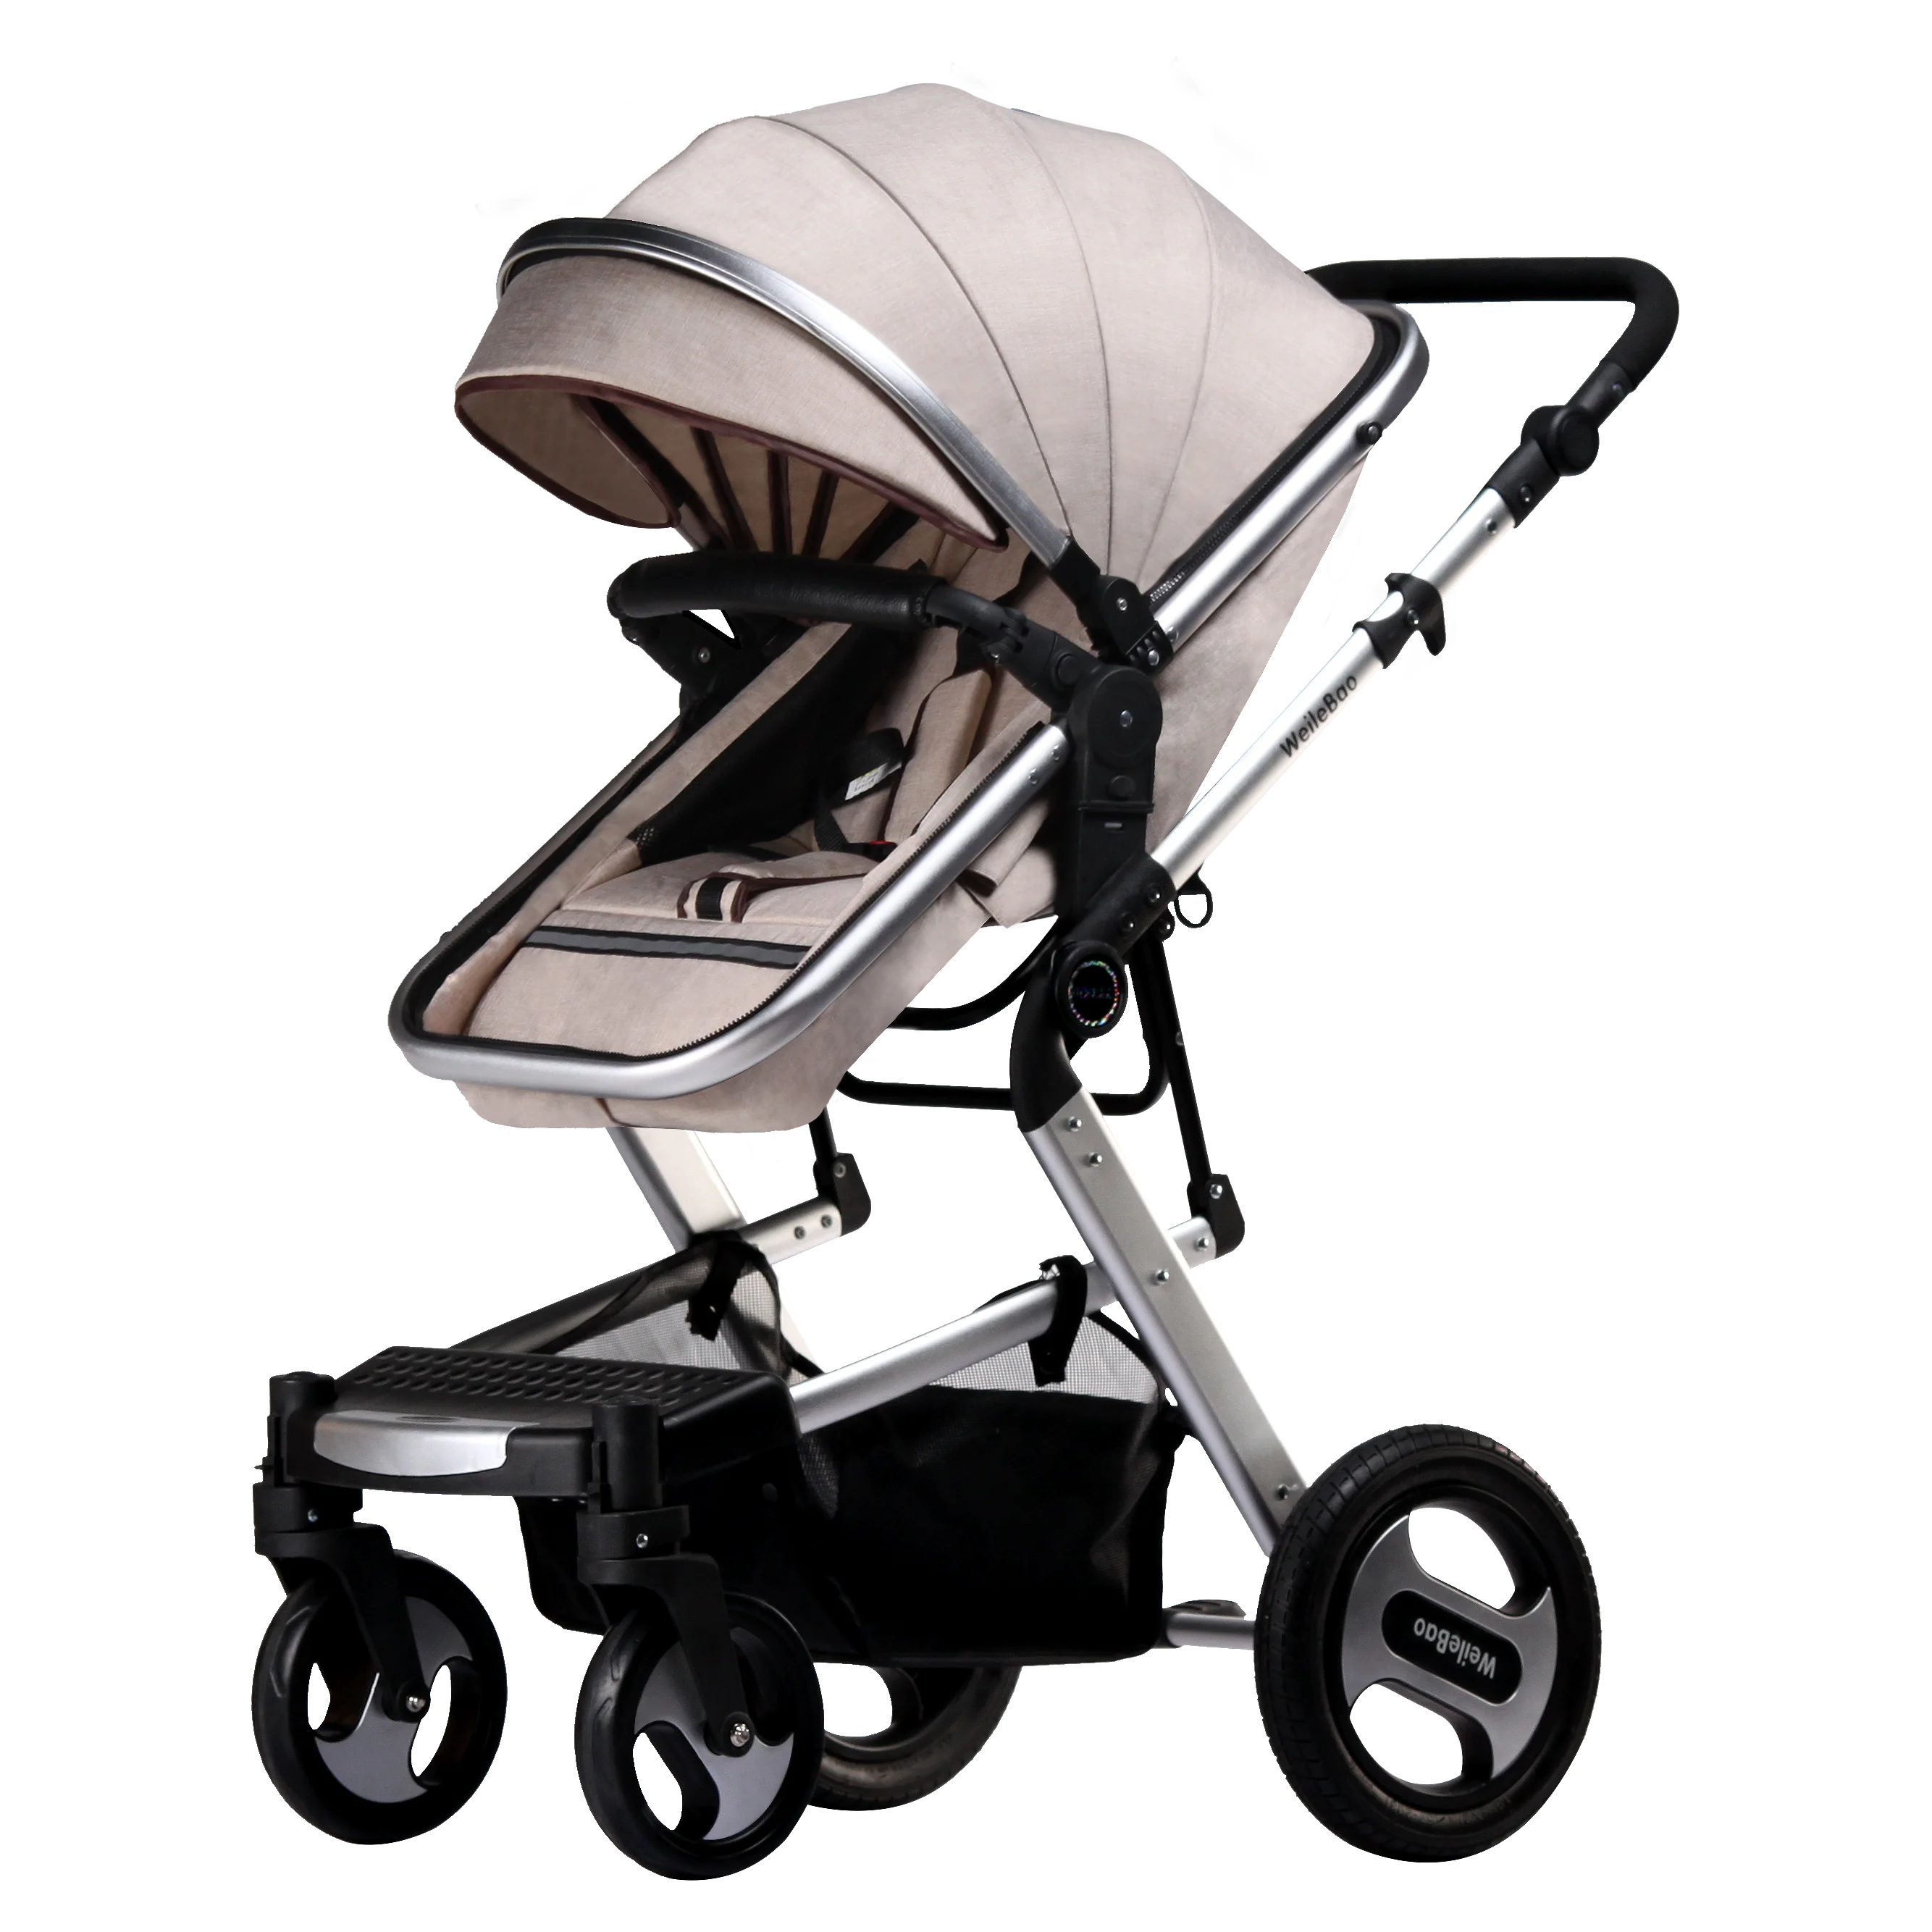 
2020 Wholes sale Luxury baby and toddler Stroller 2 in 1 High Landscape foldable baby pram buggy  (1600131160708)